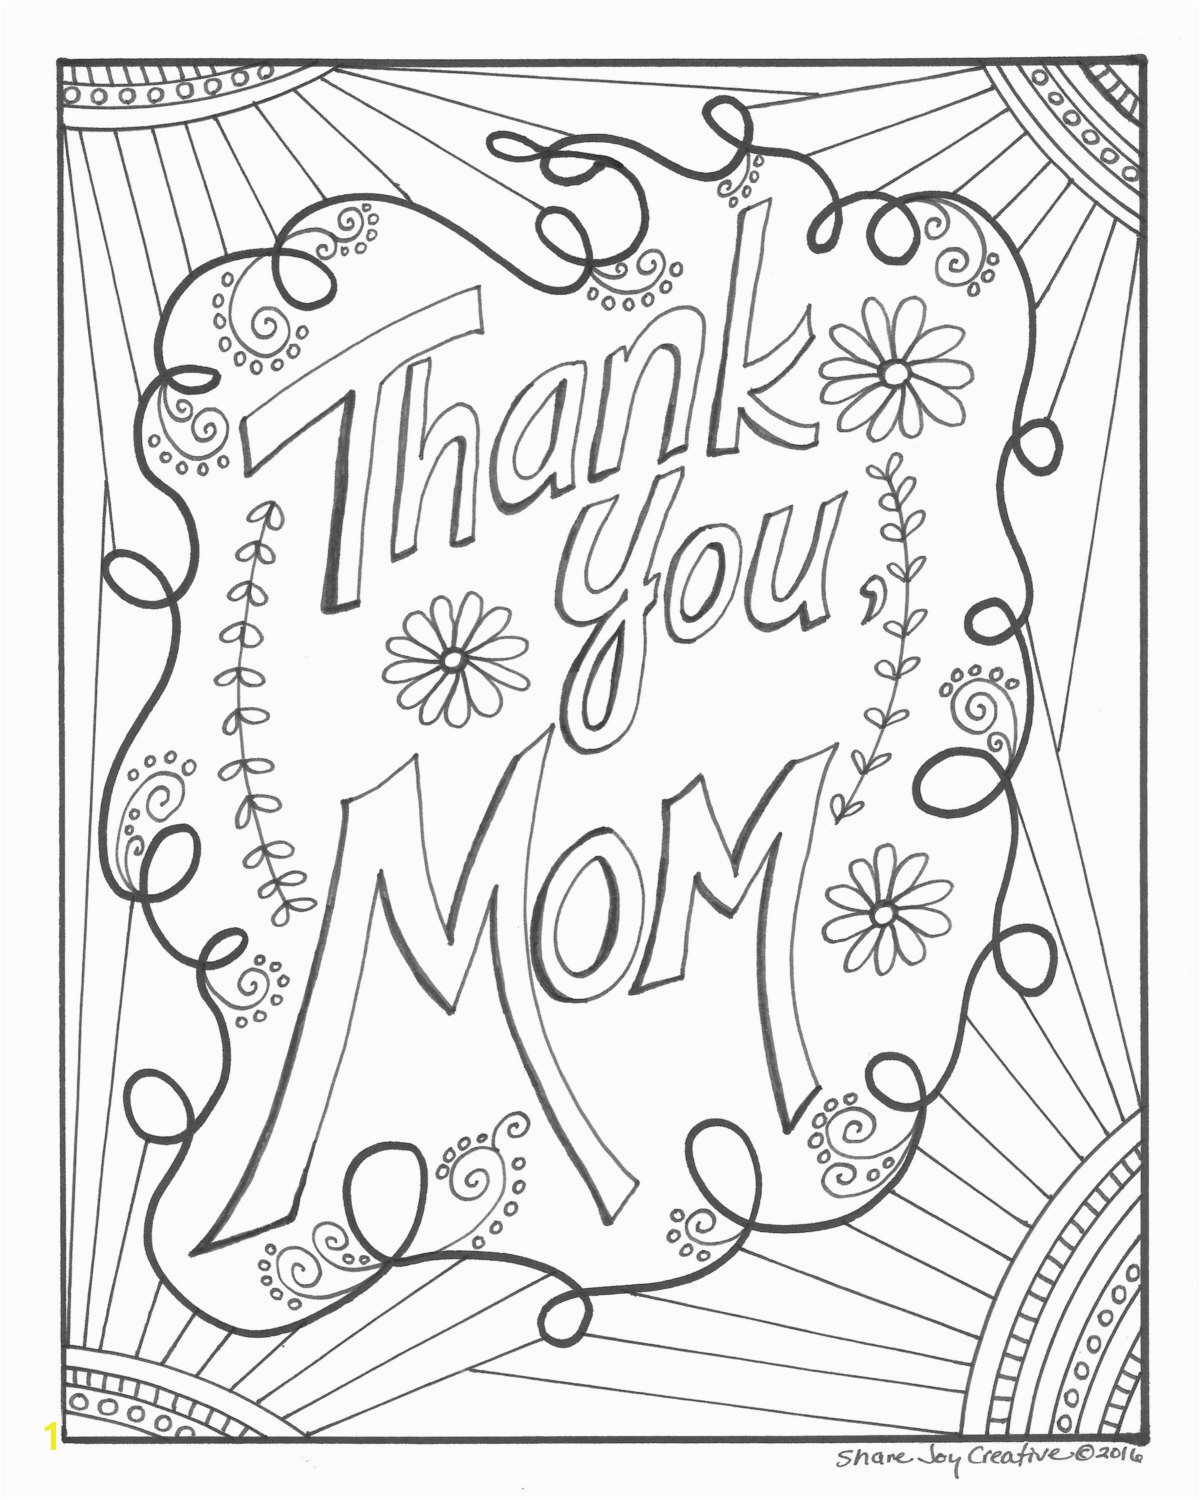 Give Thanks Coloring Page Beautiful Cool Coloring Page Unique Witch Coloring Pages New Crayola Pages 0d